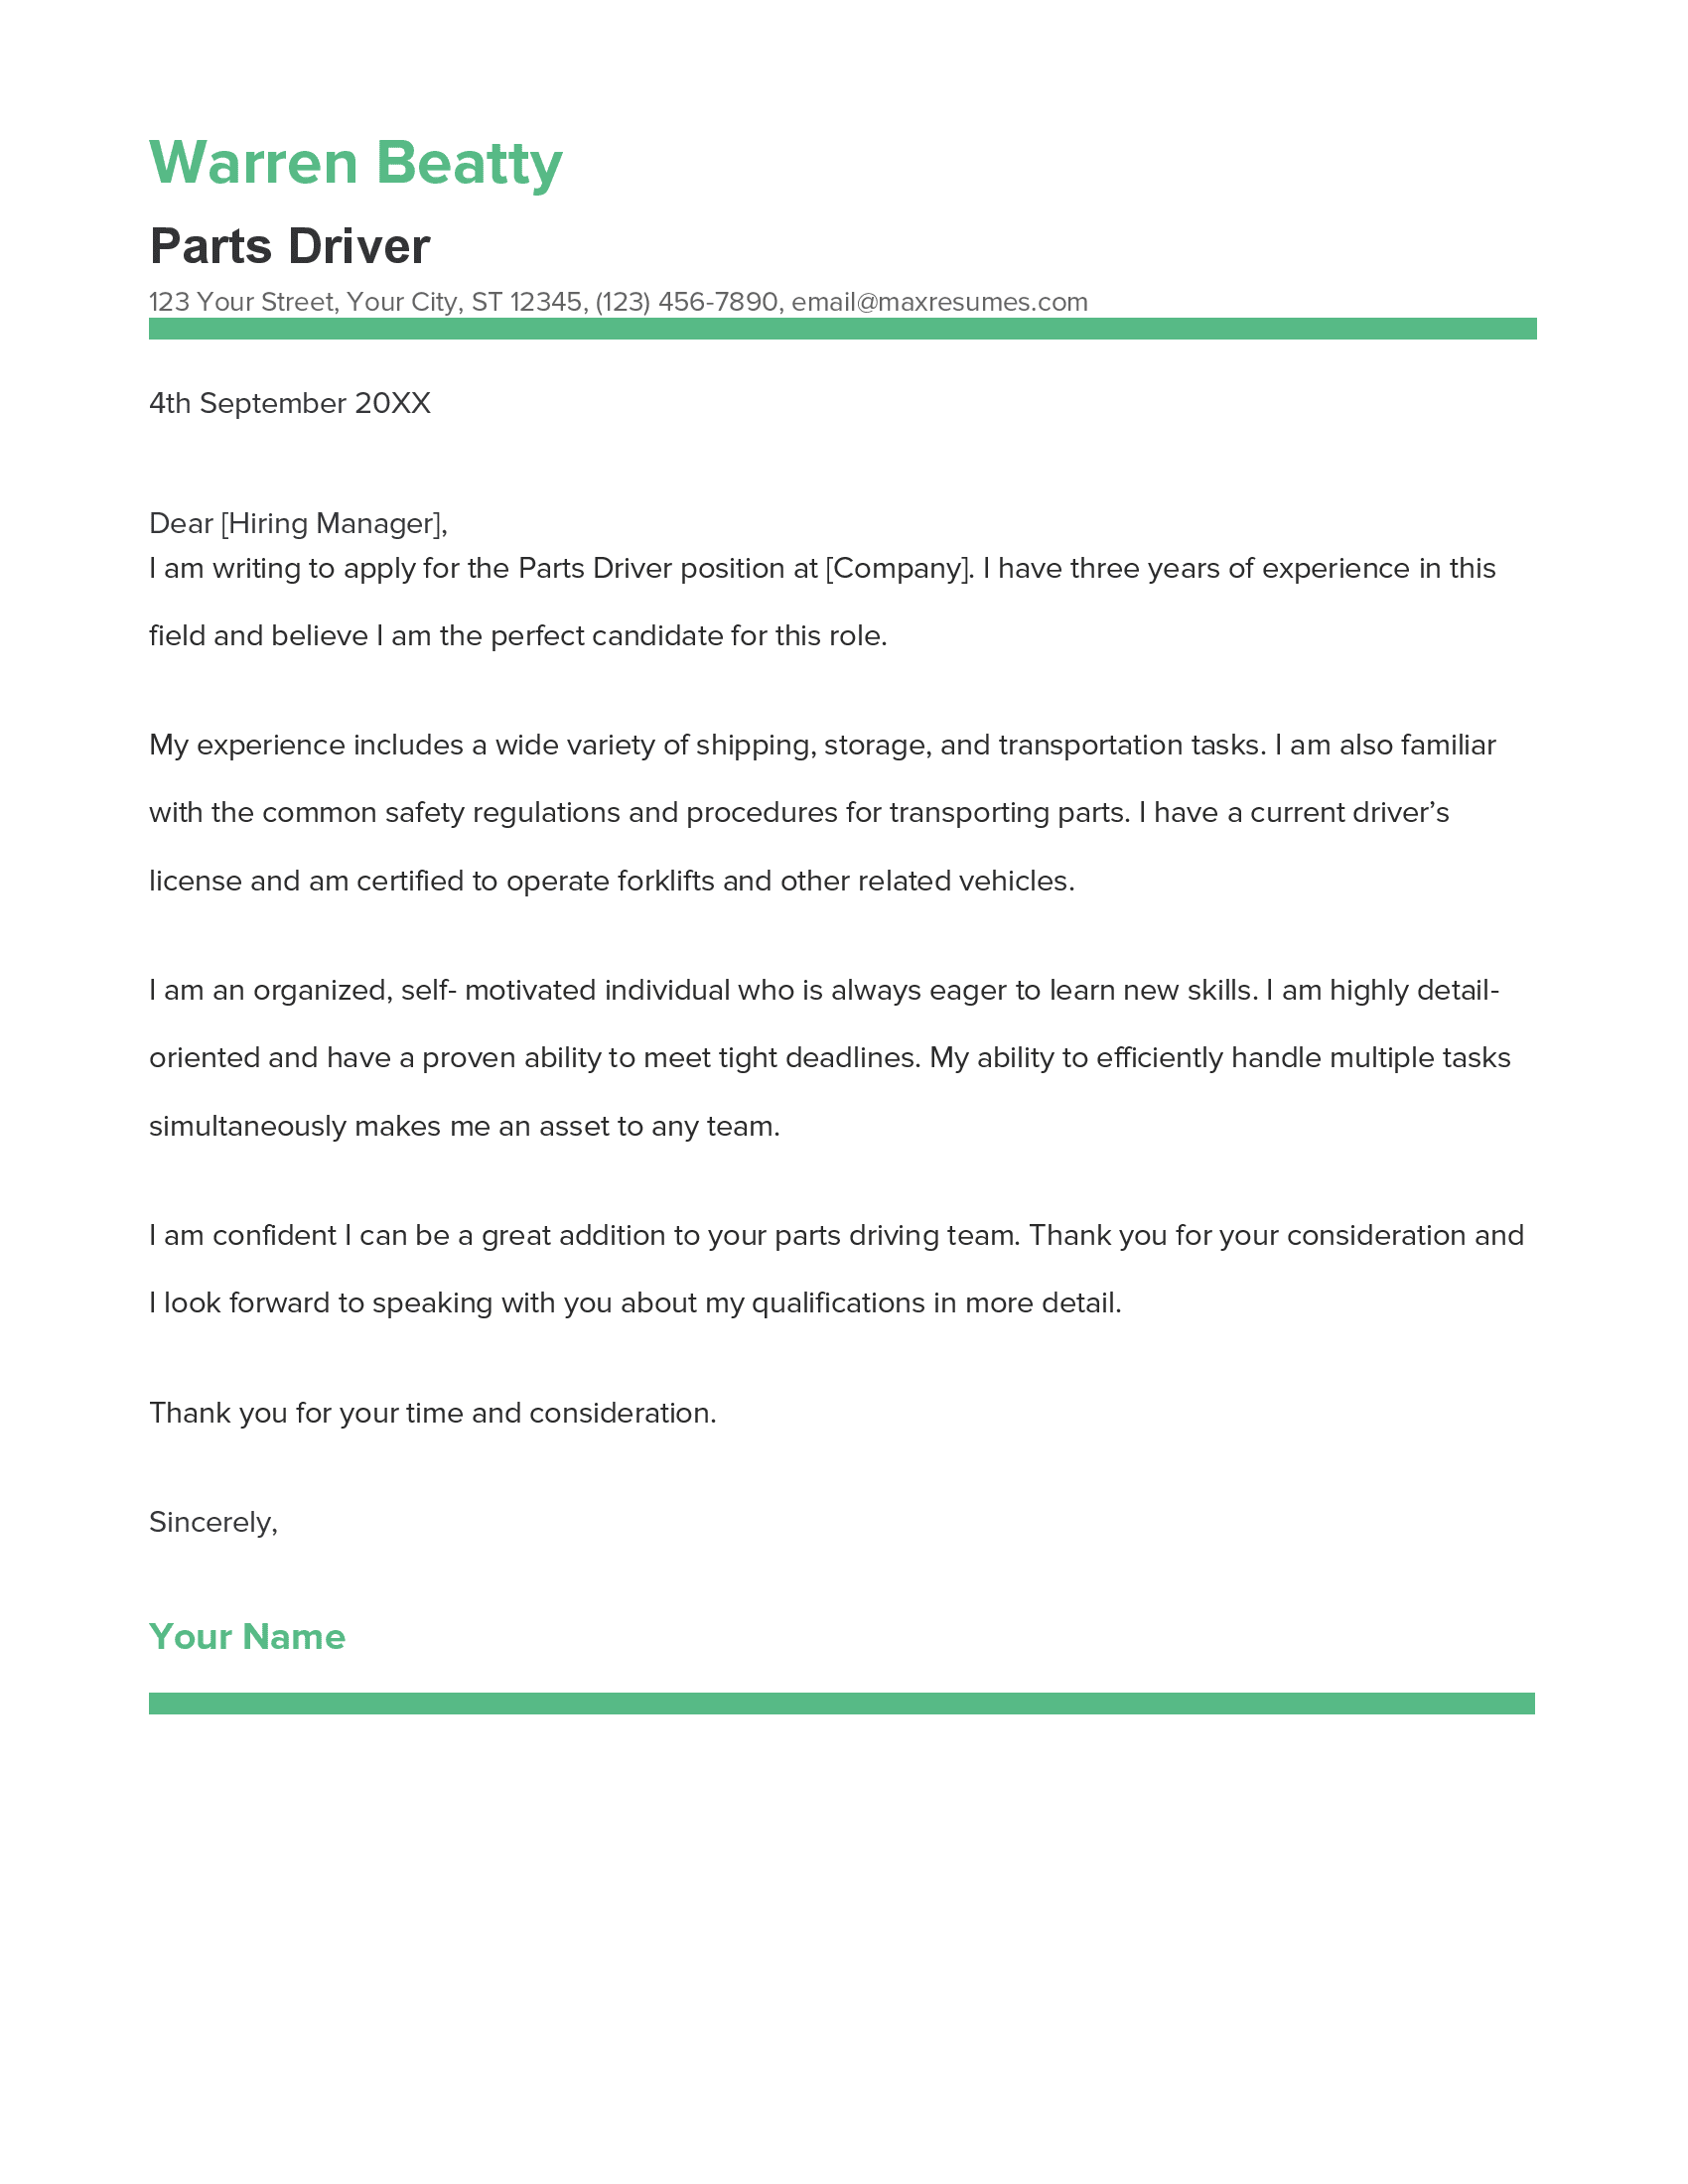 Parts Driver Cover Letter Example